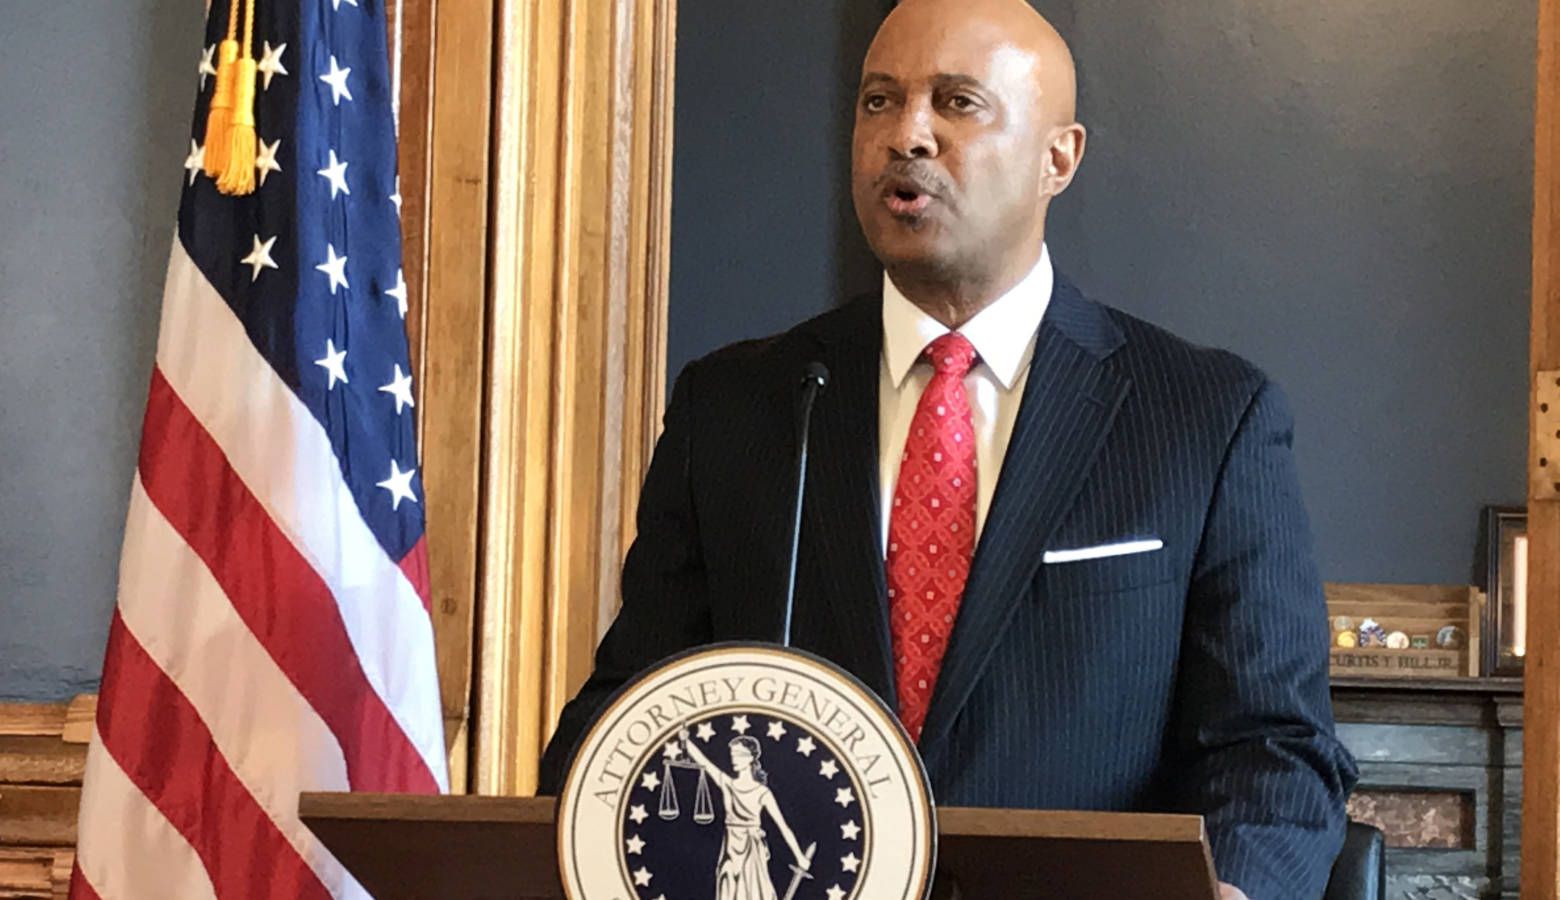 Attorney General Curtis Hill maintains his innocence after four women accused him of groping them and two others corroborated those accusations. (Brandon Smith/IPB News)